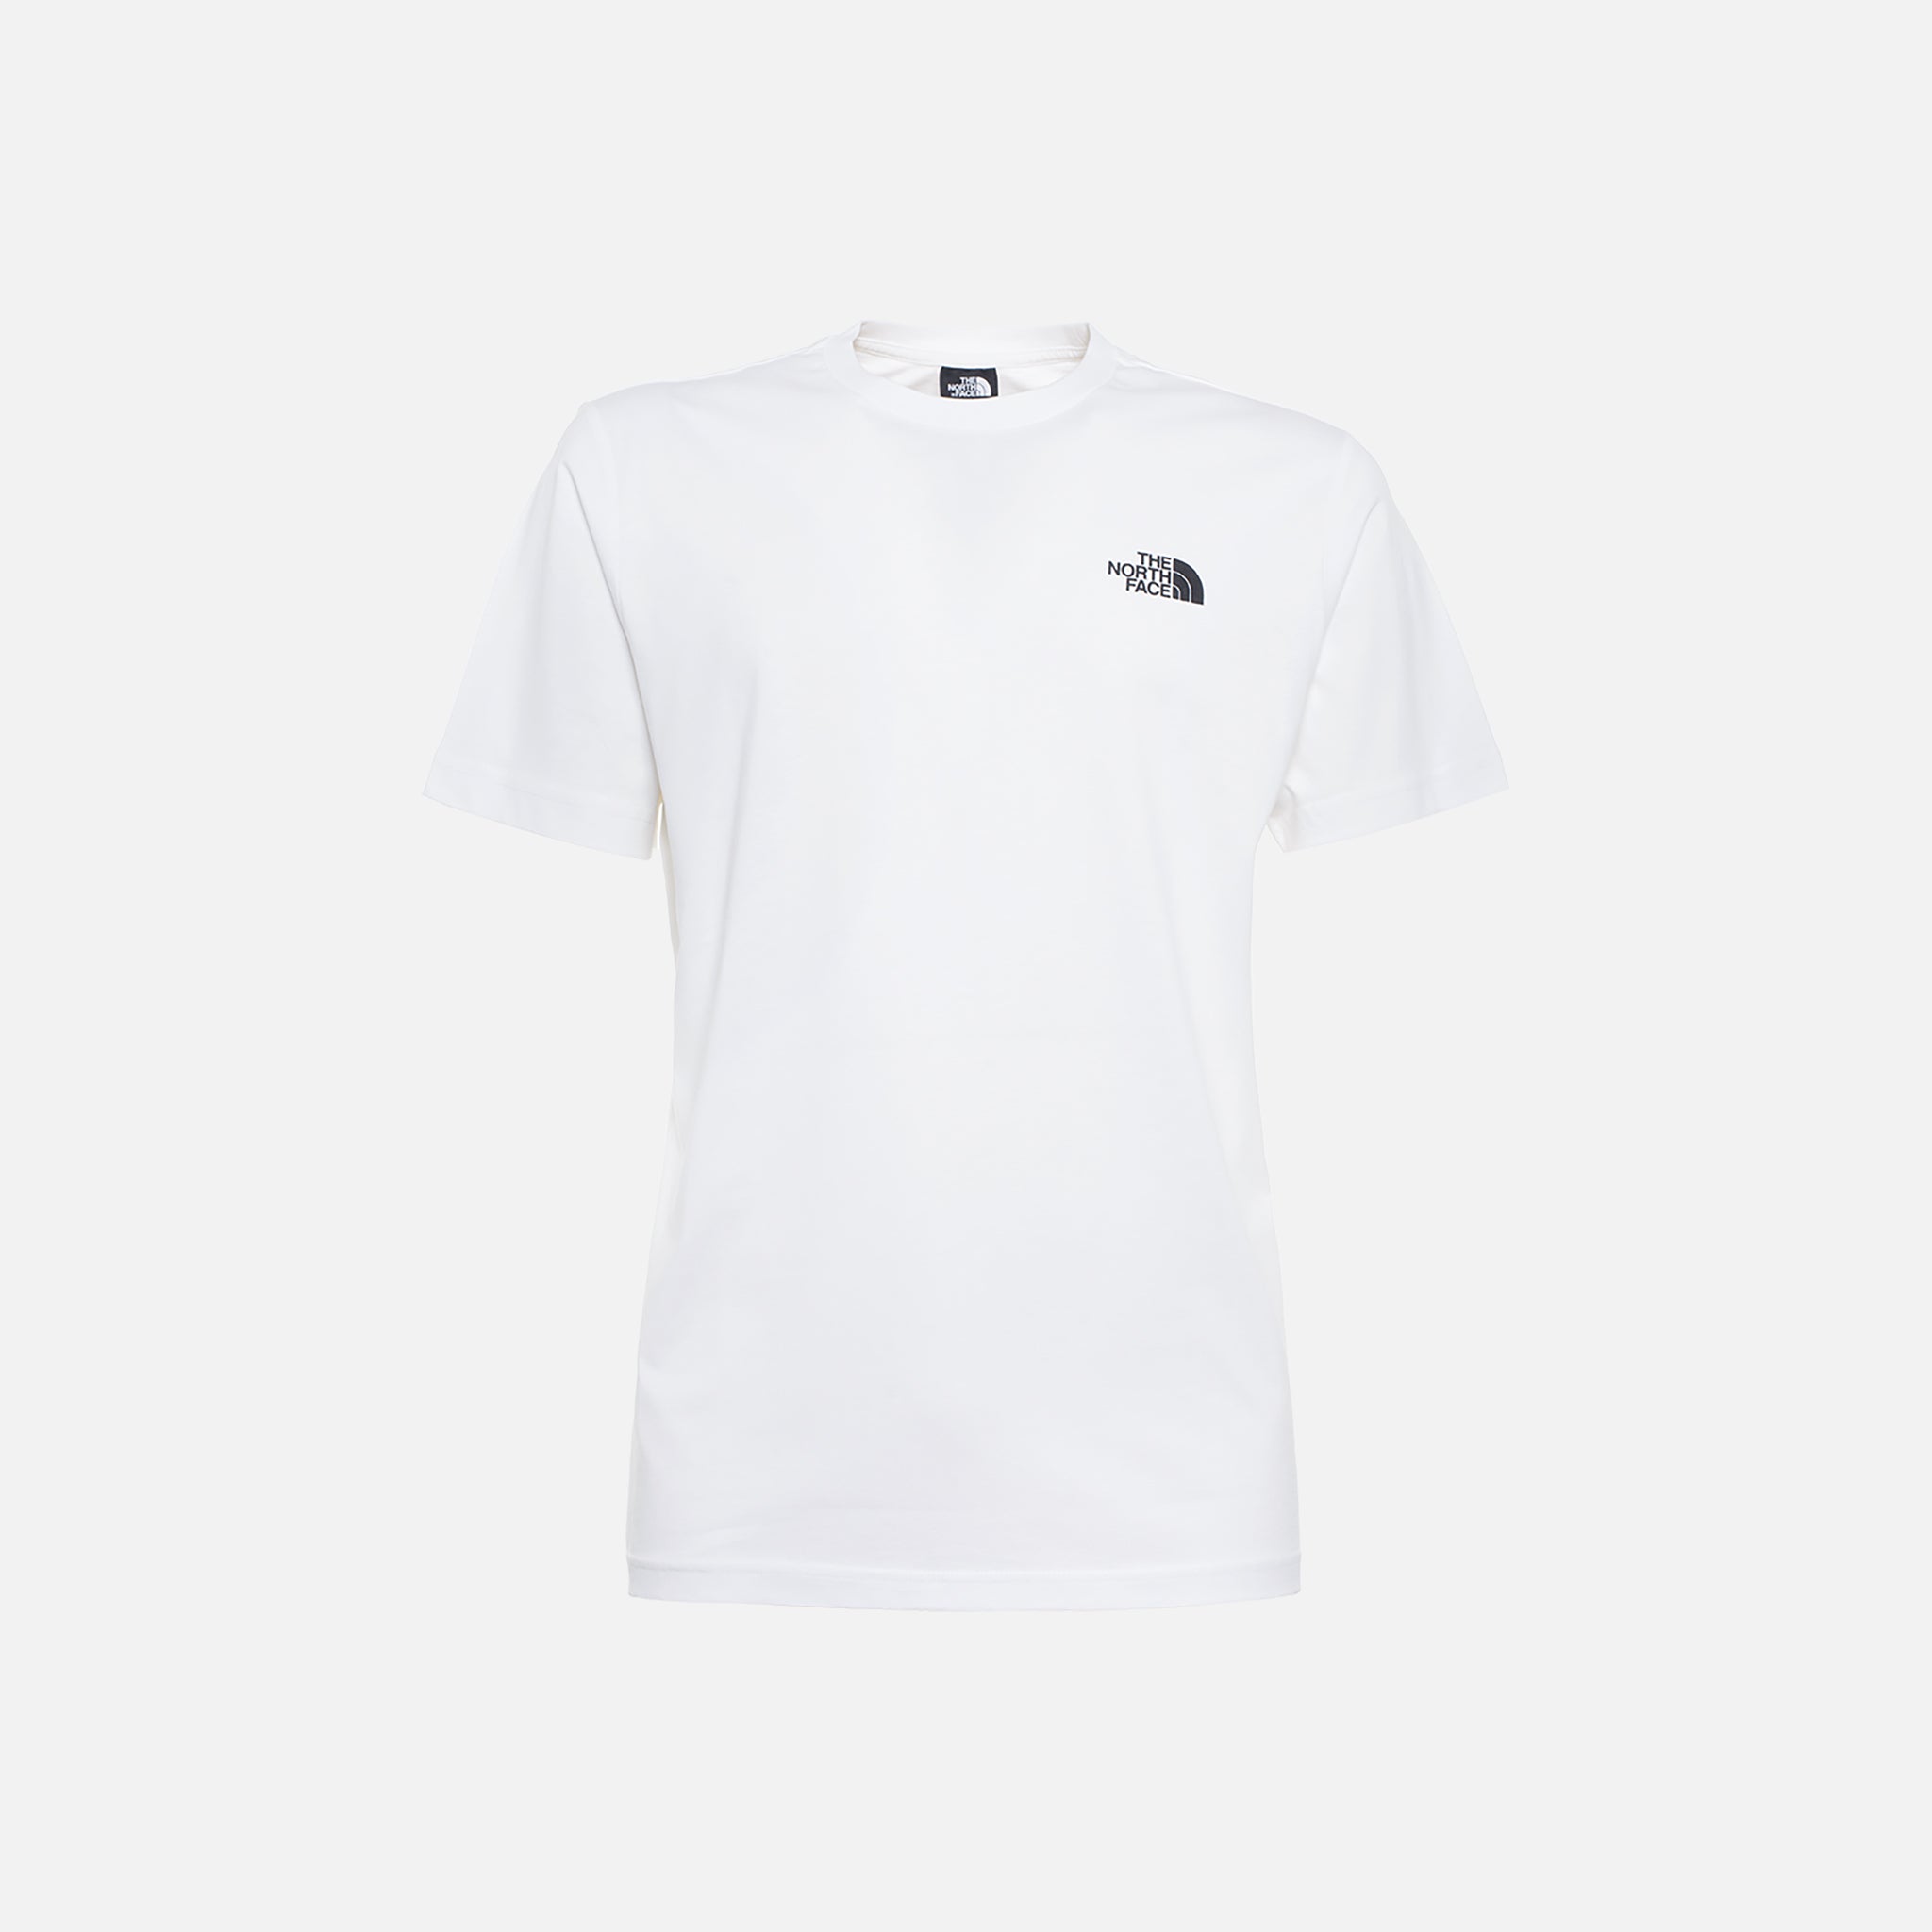 THE NORTH FACE T-SHIRT MEN’S S/S REDBOX CELEBRATION TEE